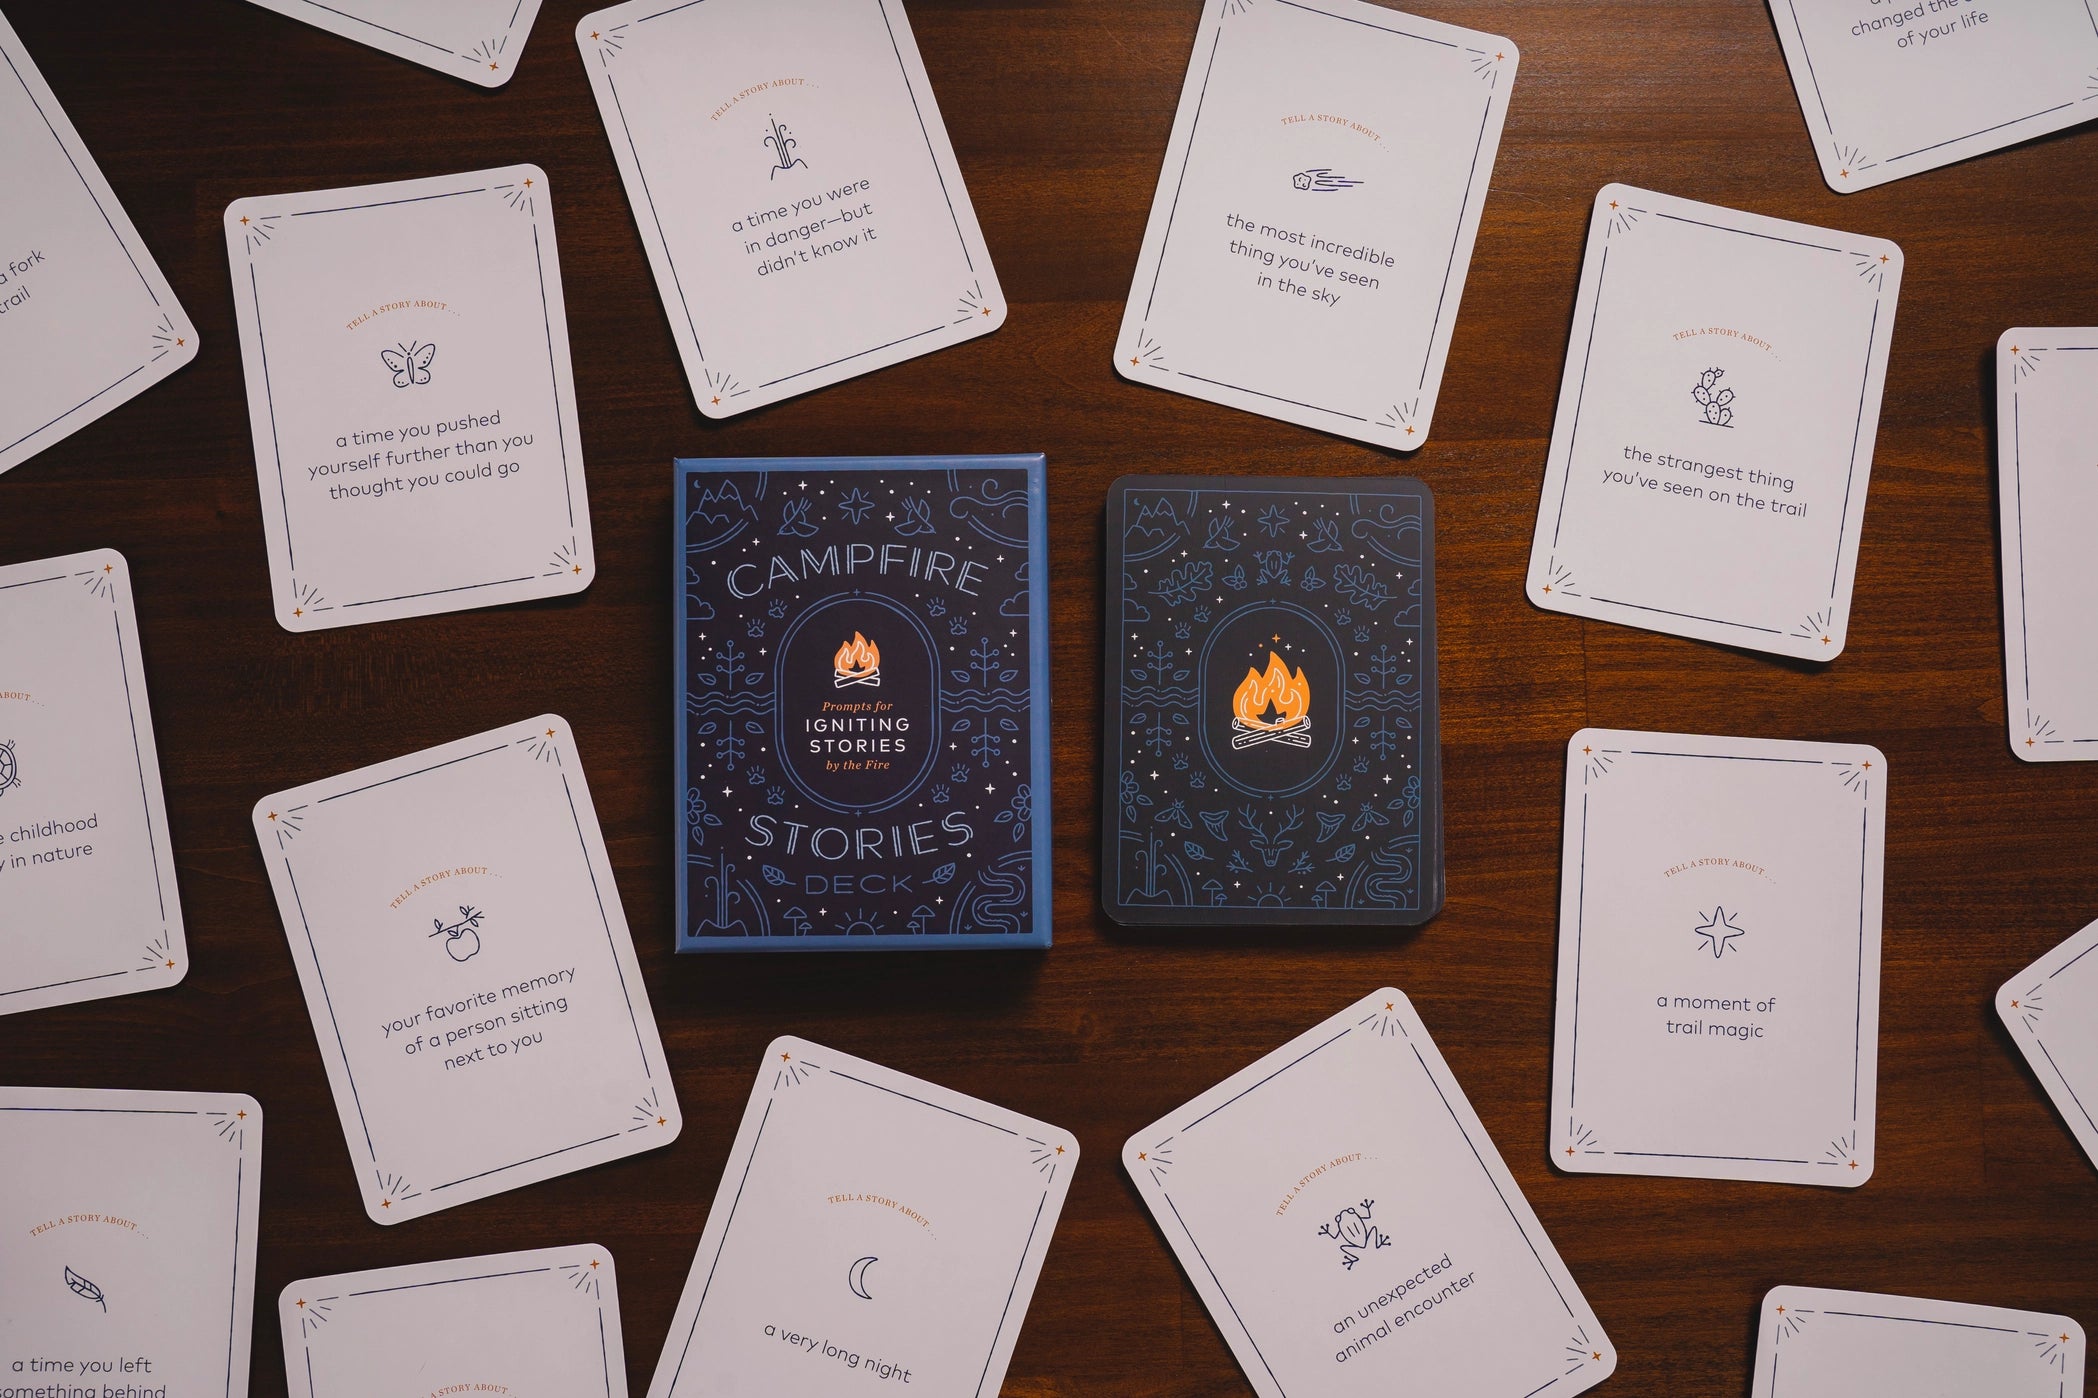 Campfire Stories Deck: Prompts For Igniting Stories